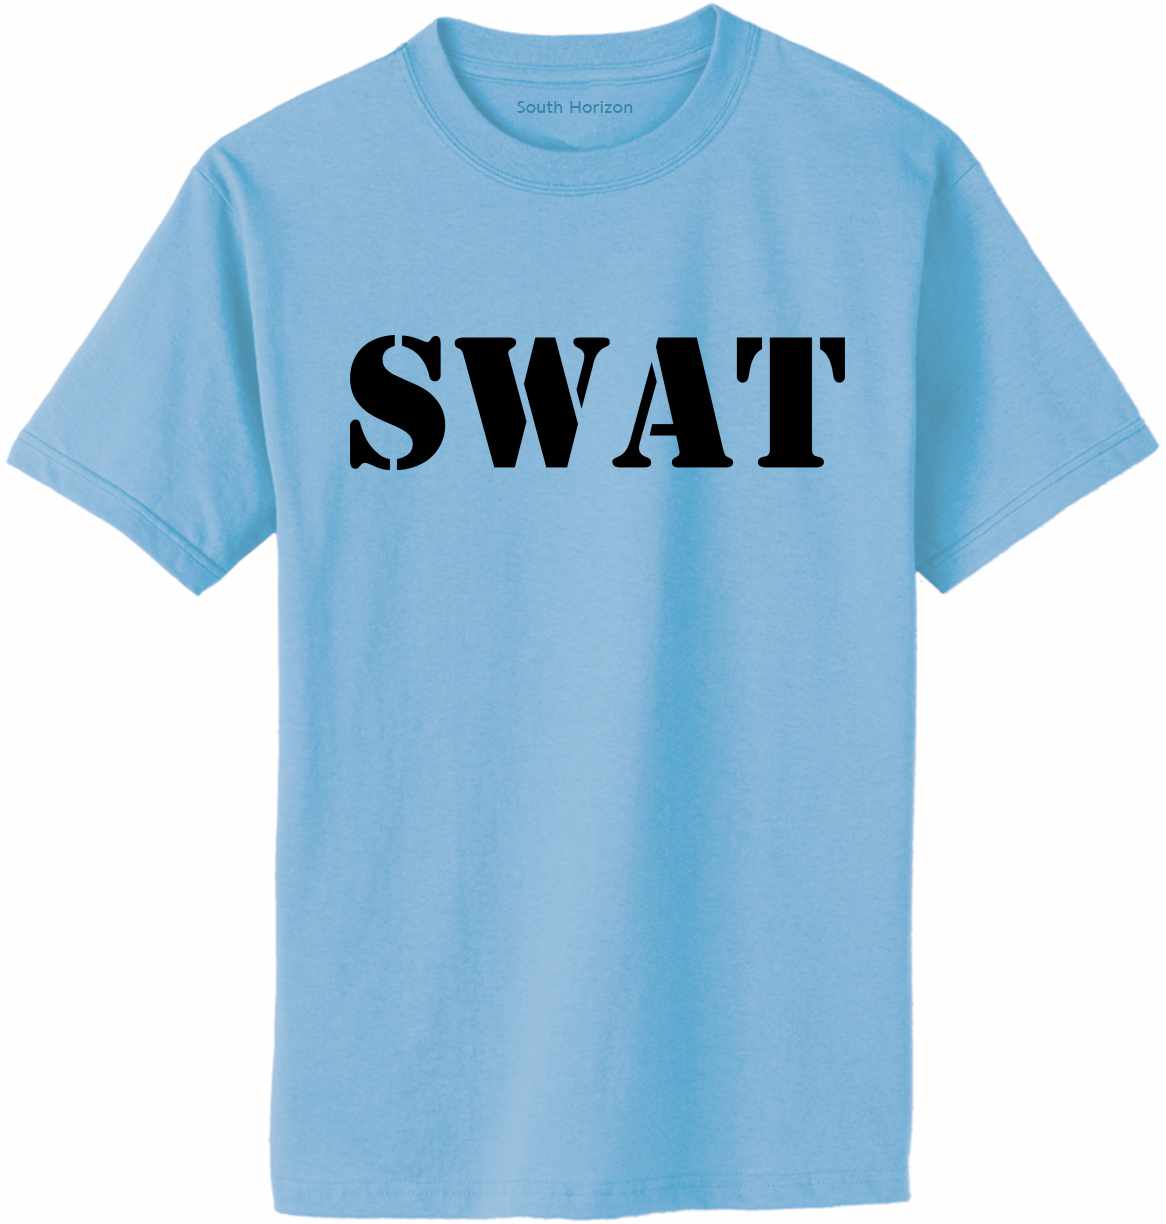 colors Adult Horizon T-Shirt South T-Shirt in – SWAT Company on 17